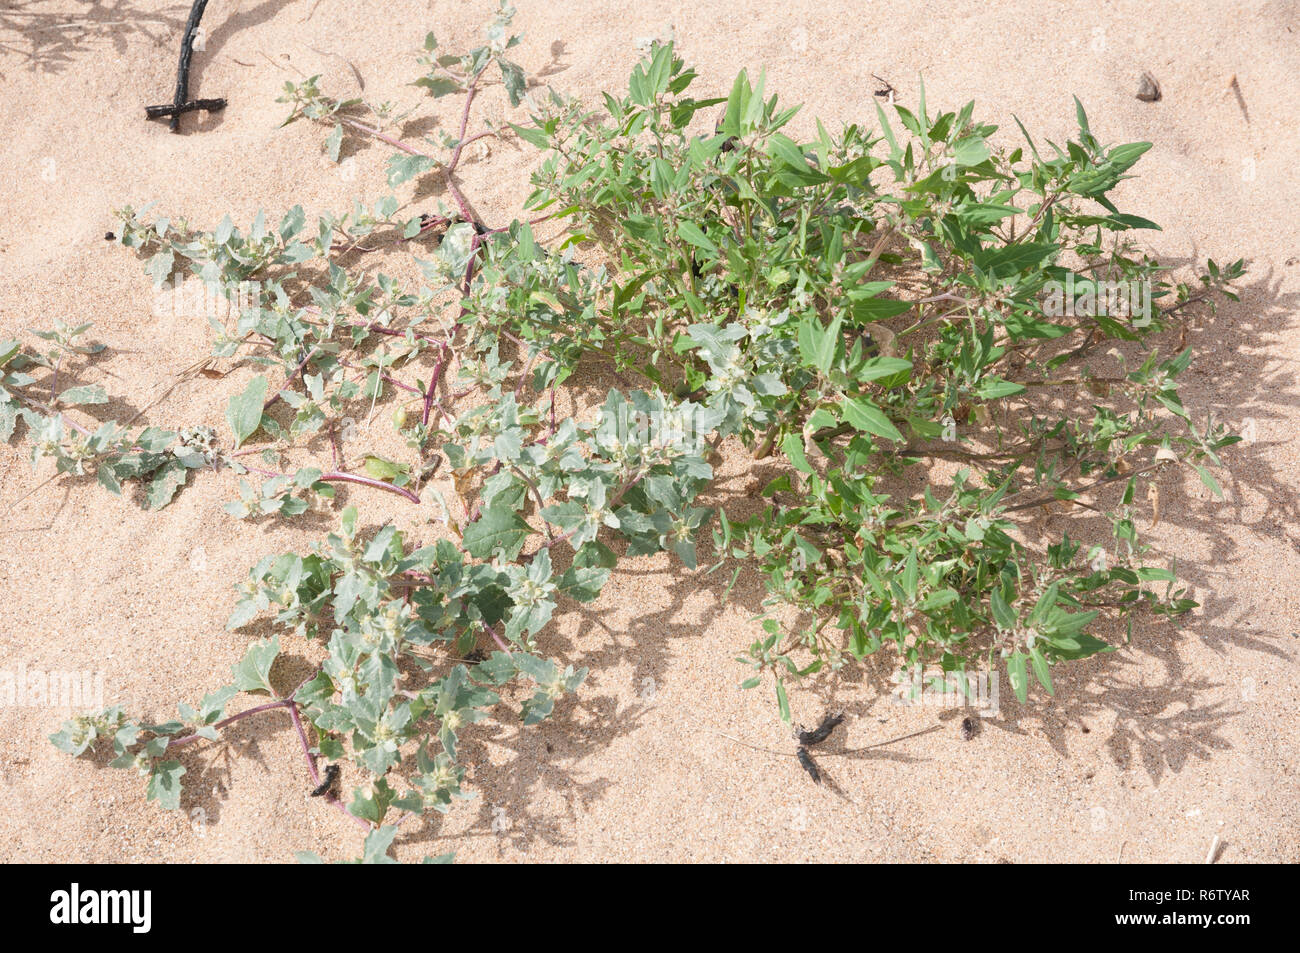 Frosted and Spea-leaved Orache (Atriplex laciniata and Atriplex prostrata) on a beach in Northumberland, England Stock Photo